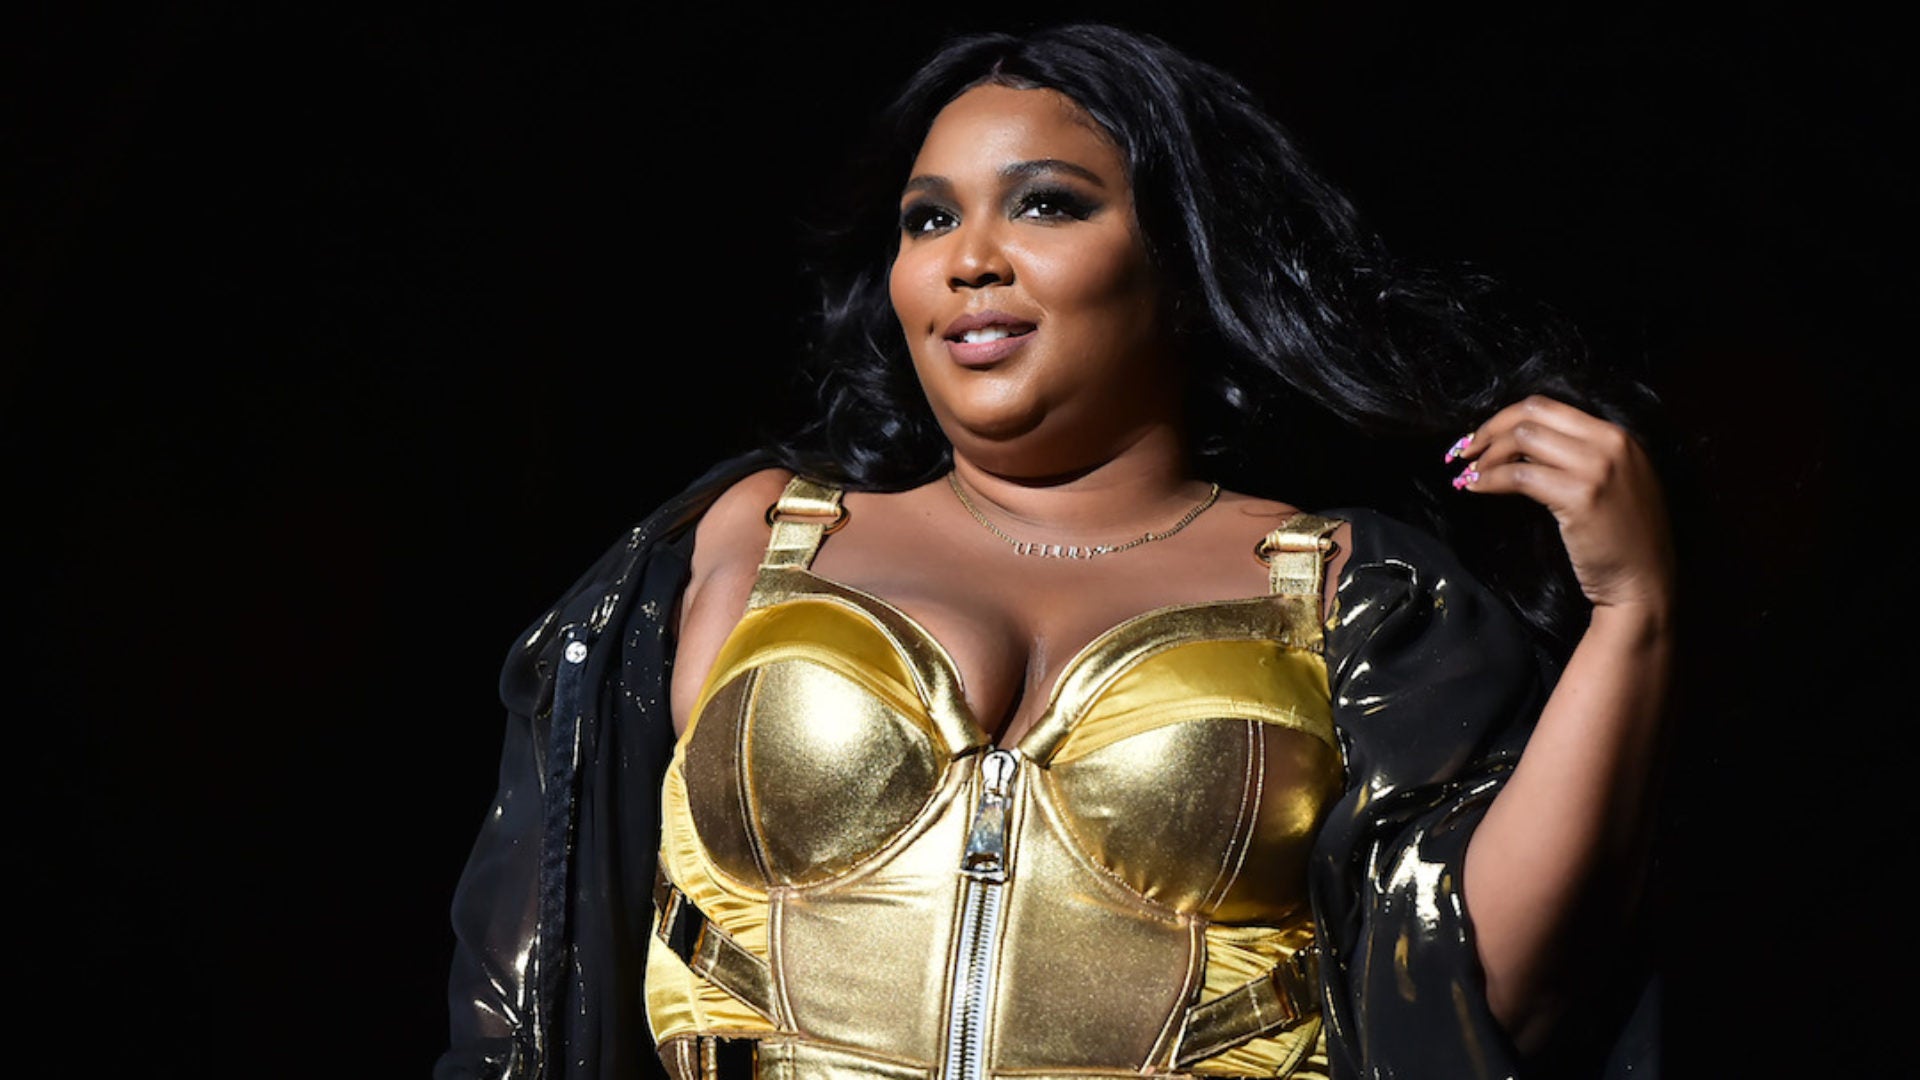 See The Full List Of 2020 Grammy Nominees Including Lizzo, Michelle Obama And Beyonce!